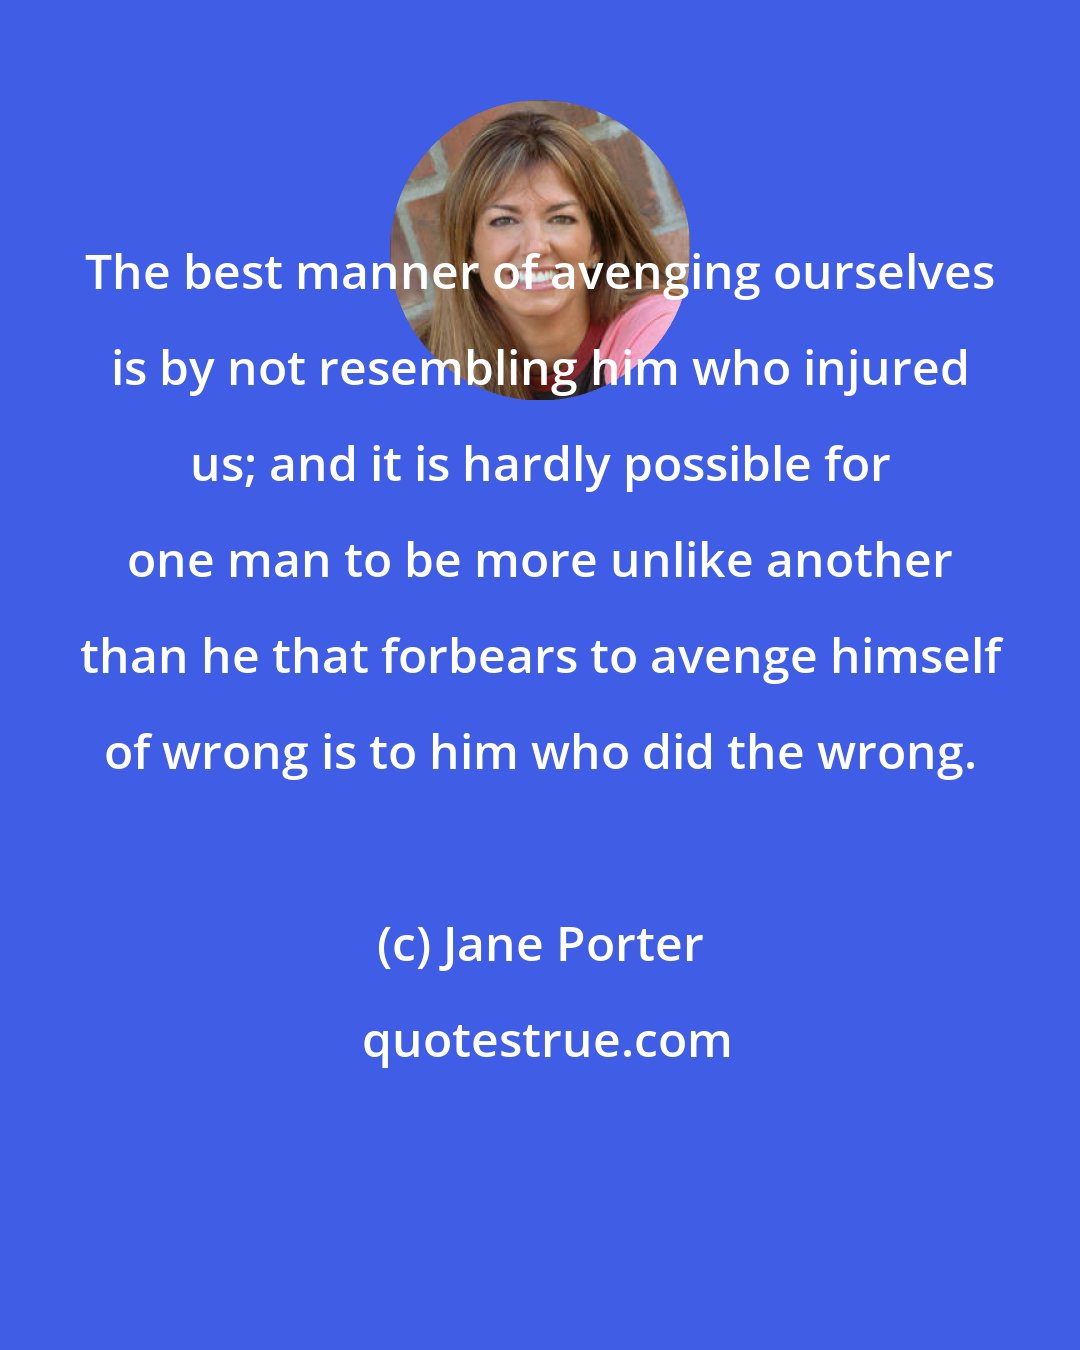 Jane Porter: The best manner of avenging ourselves is by not resembling him who injured us; and it is hardly possible for one man to be more unlike another than he that forbears to avenge himself of wrong is to him who did the wrong.